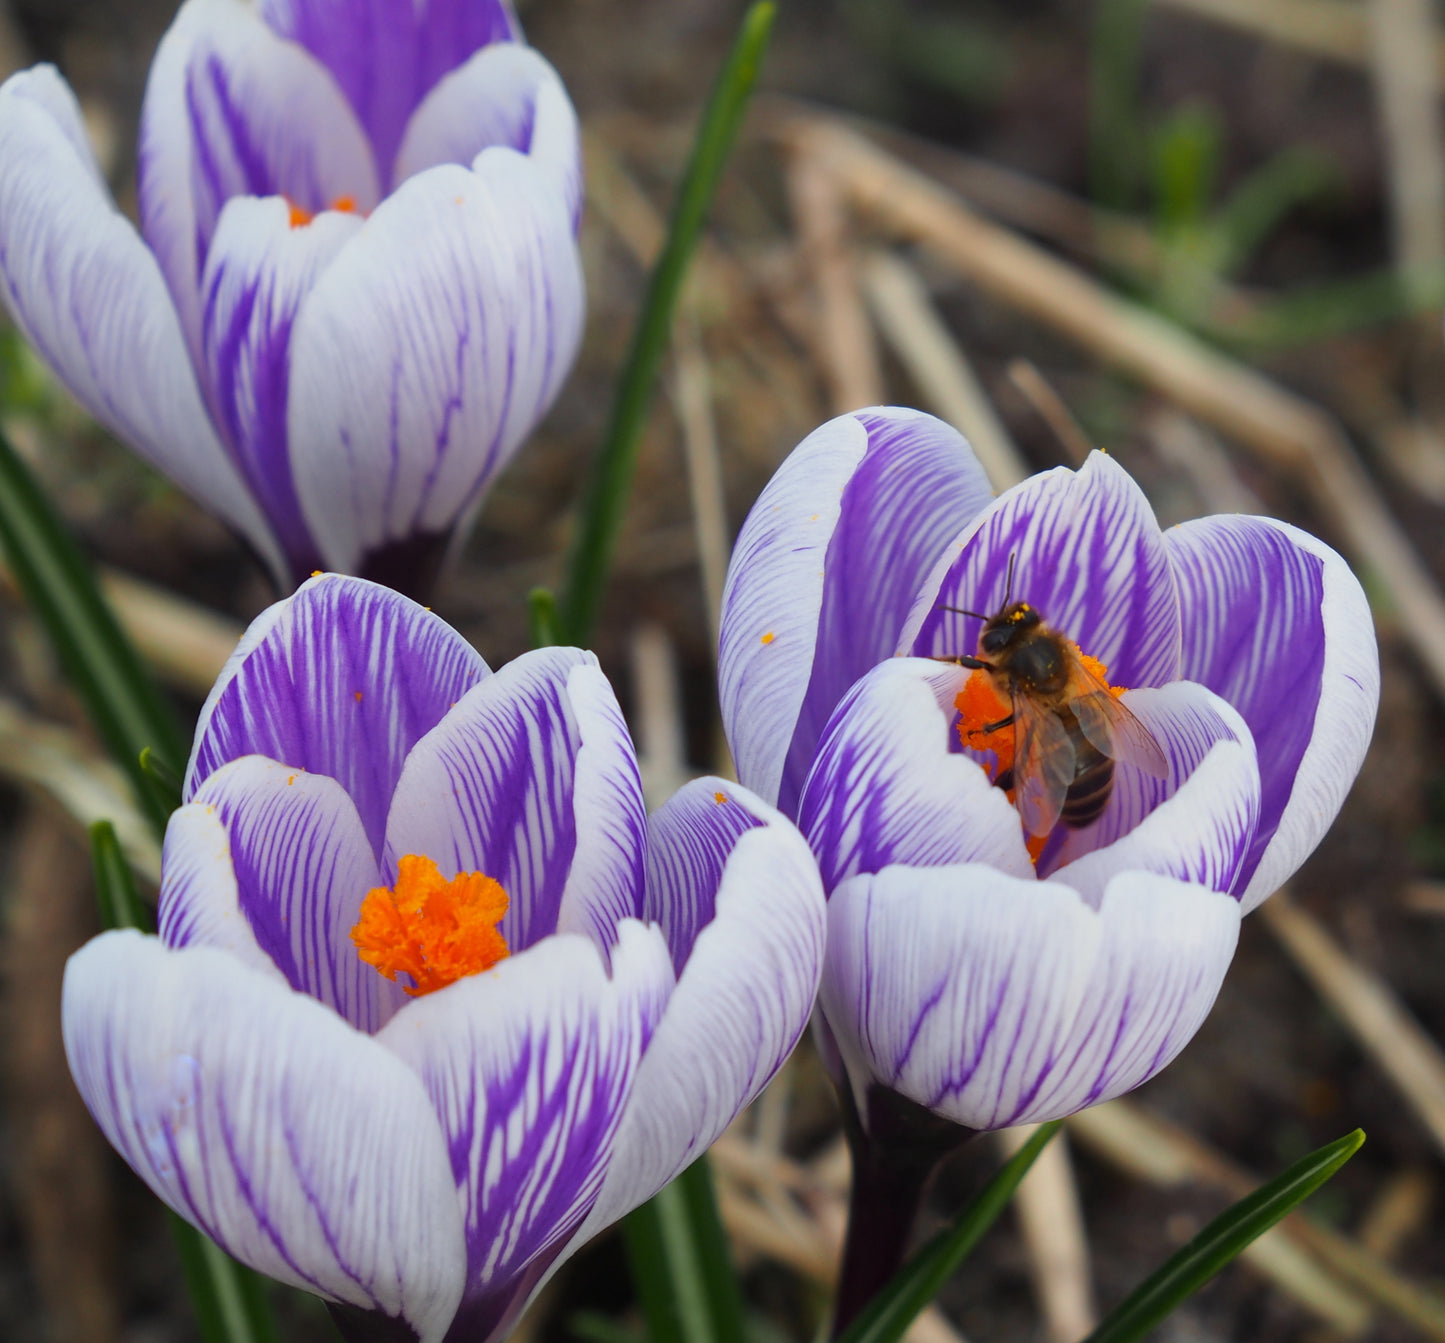 Crocus 'King of the Striped'